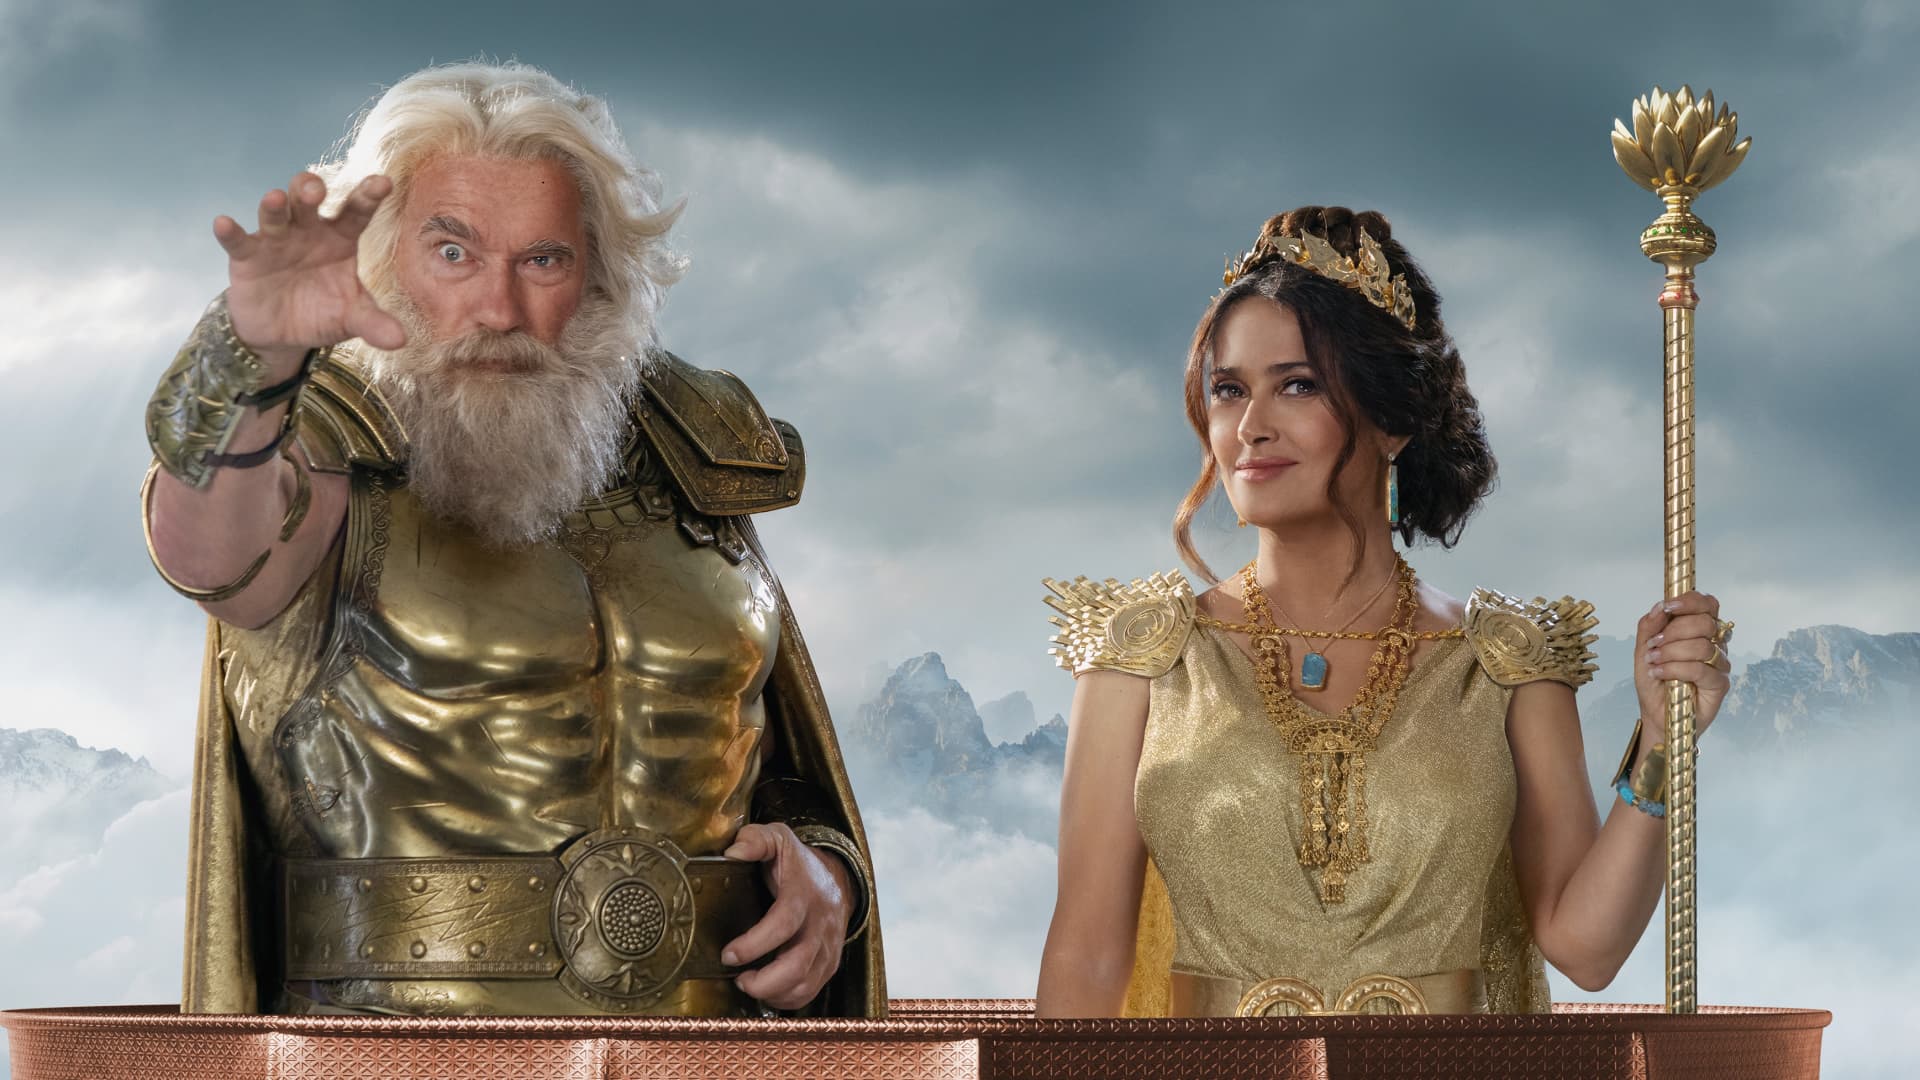 Arnold Schwarzenegger and Salma Hayek Pinault star as the Greek gods Zeus and Hera for BMW's new Super Bowl ad for the iX electric SUV.